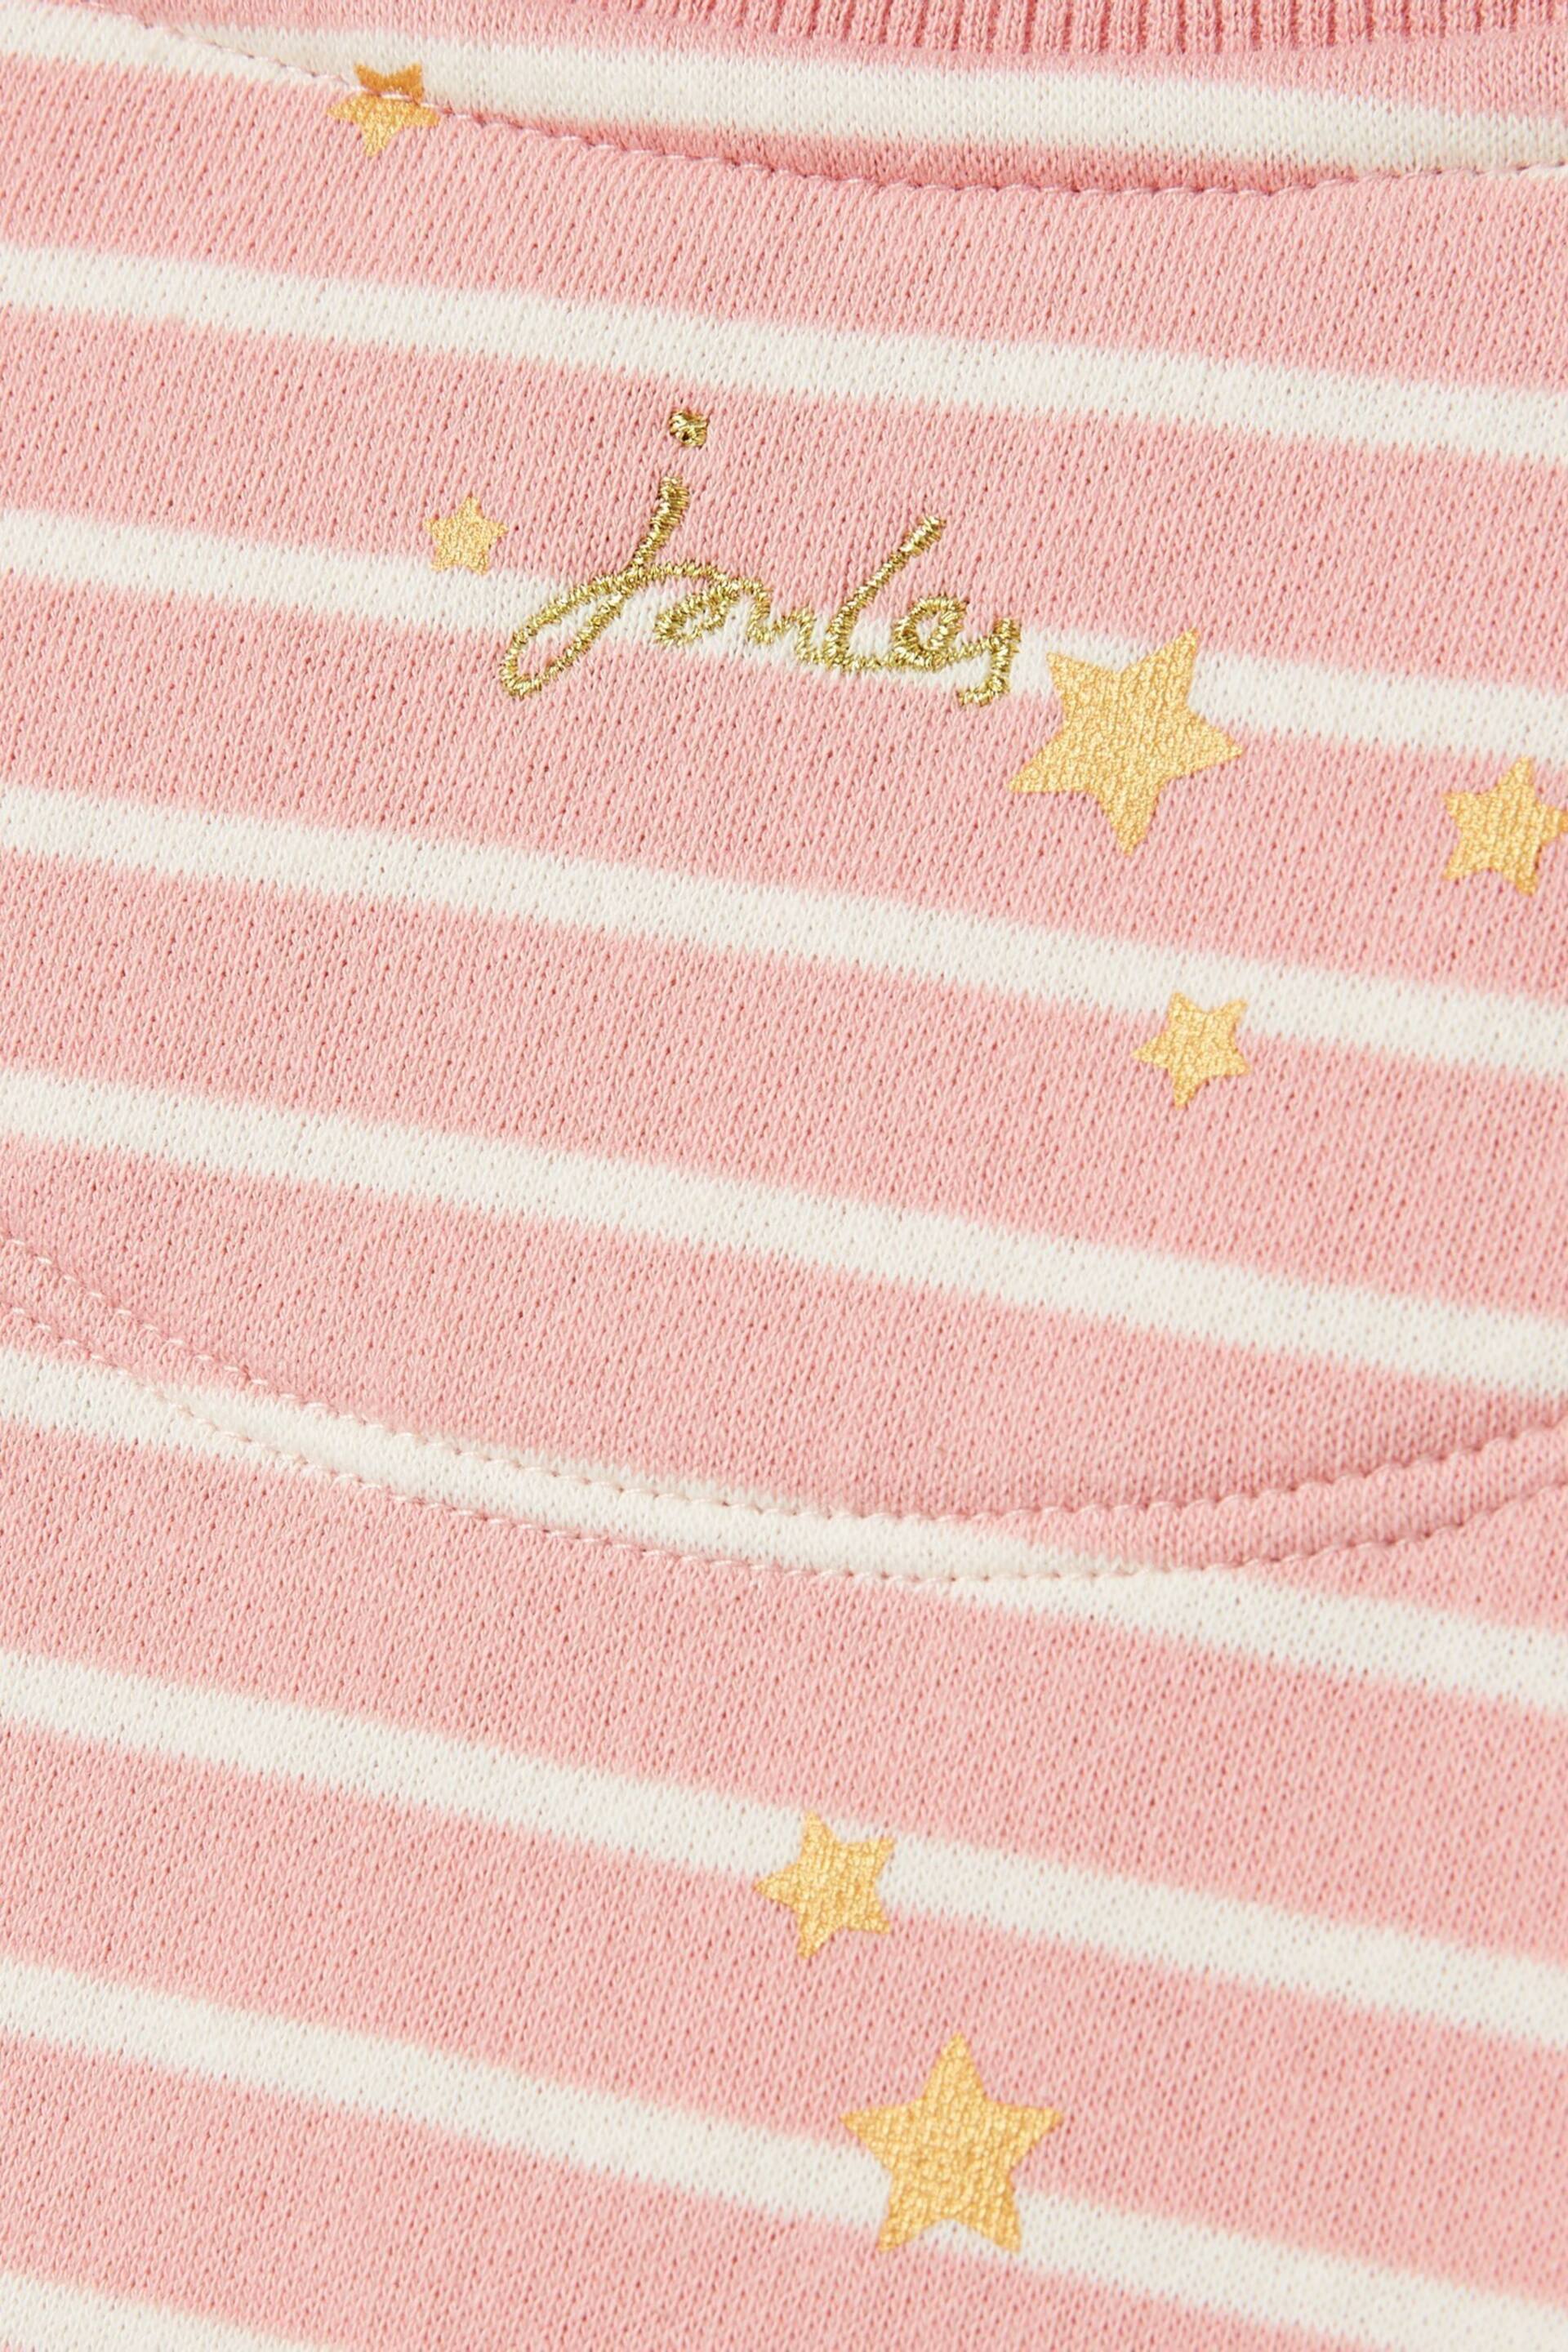 Joules Poppy Pink Striped Sweater Dress - Image 5 of 5